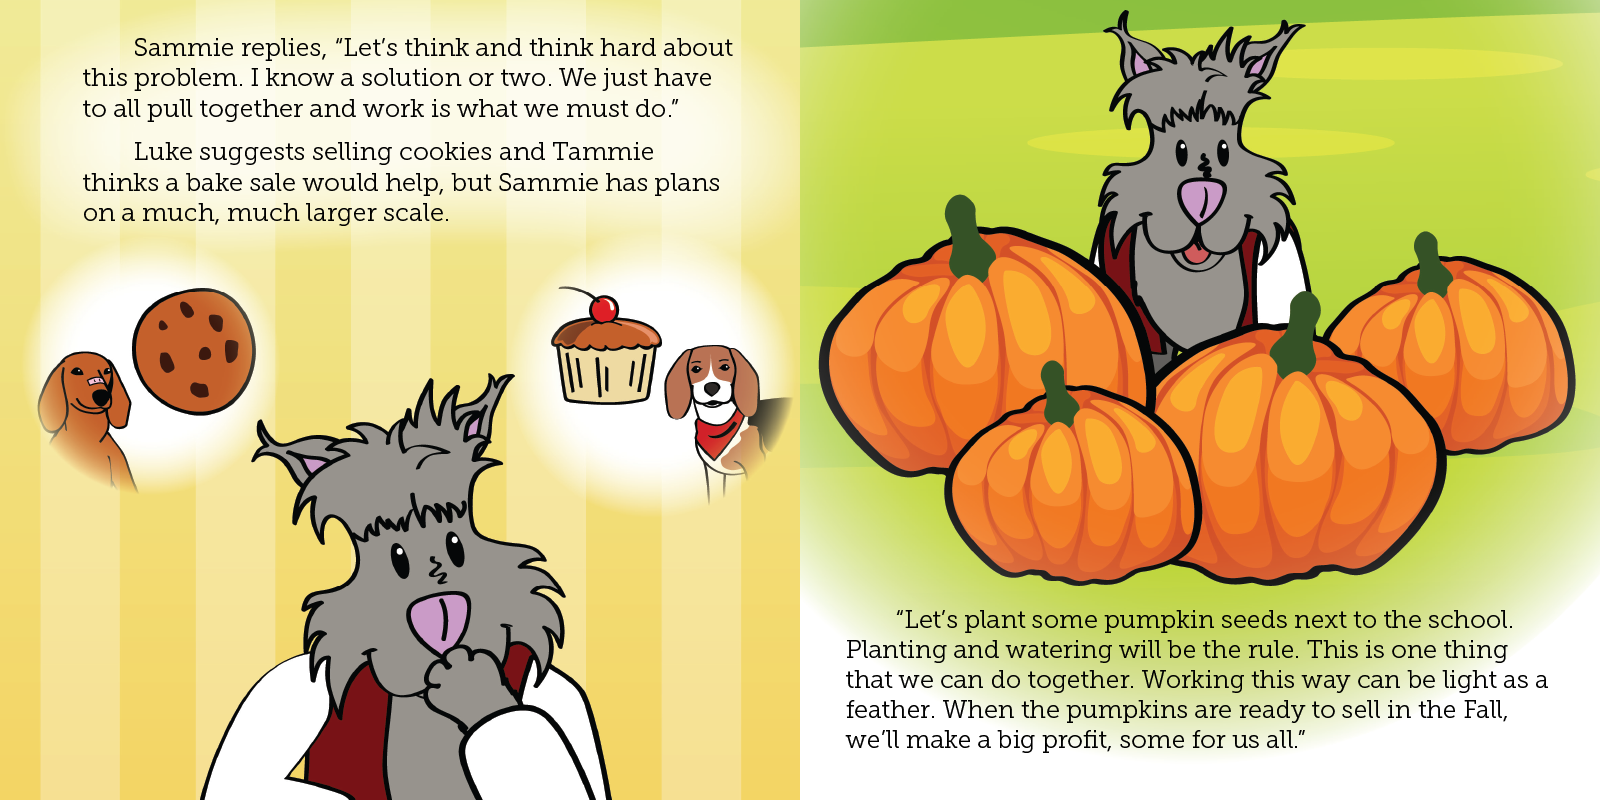 Slide 8 of the Sammie and the Pumpkin Patch E-book